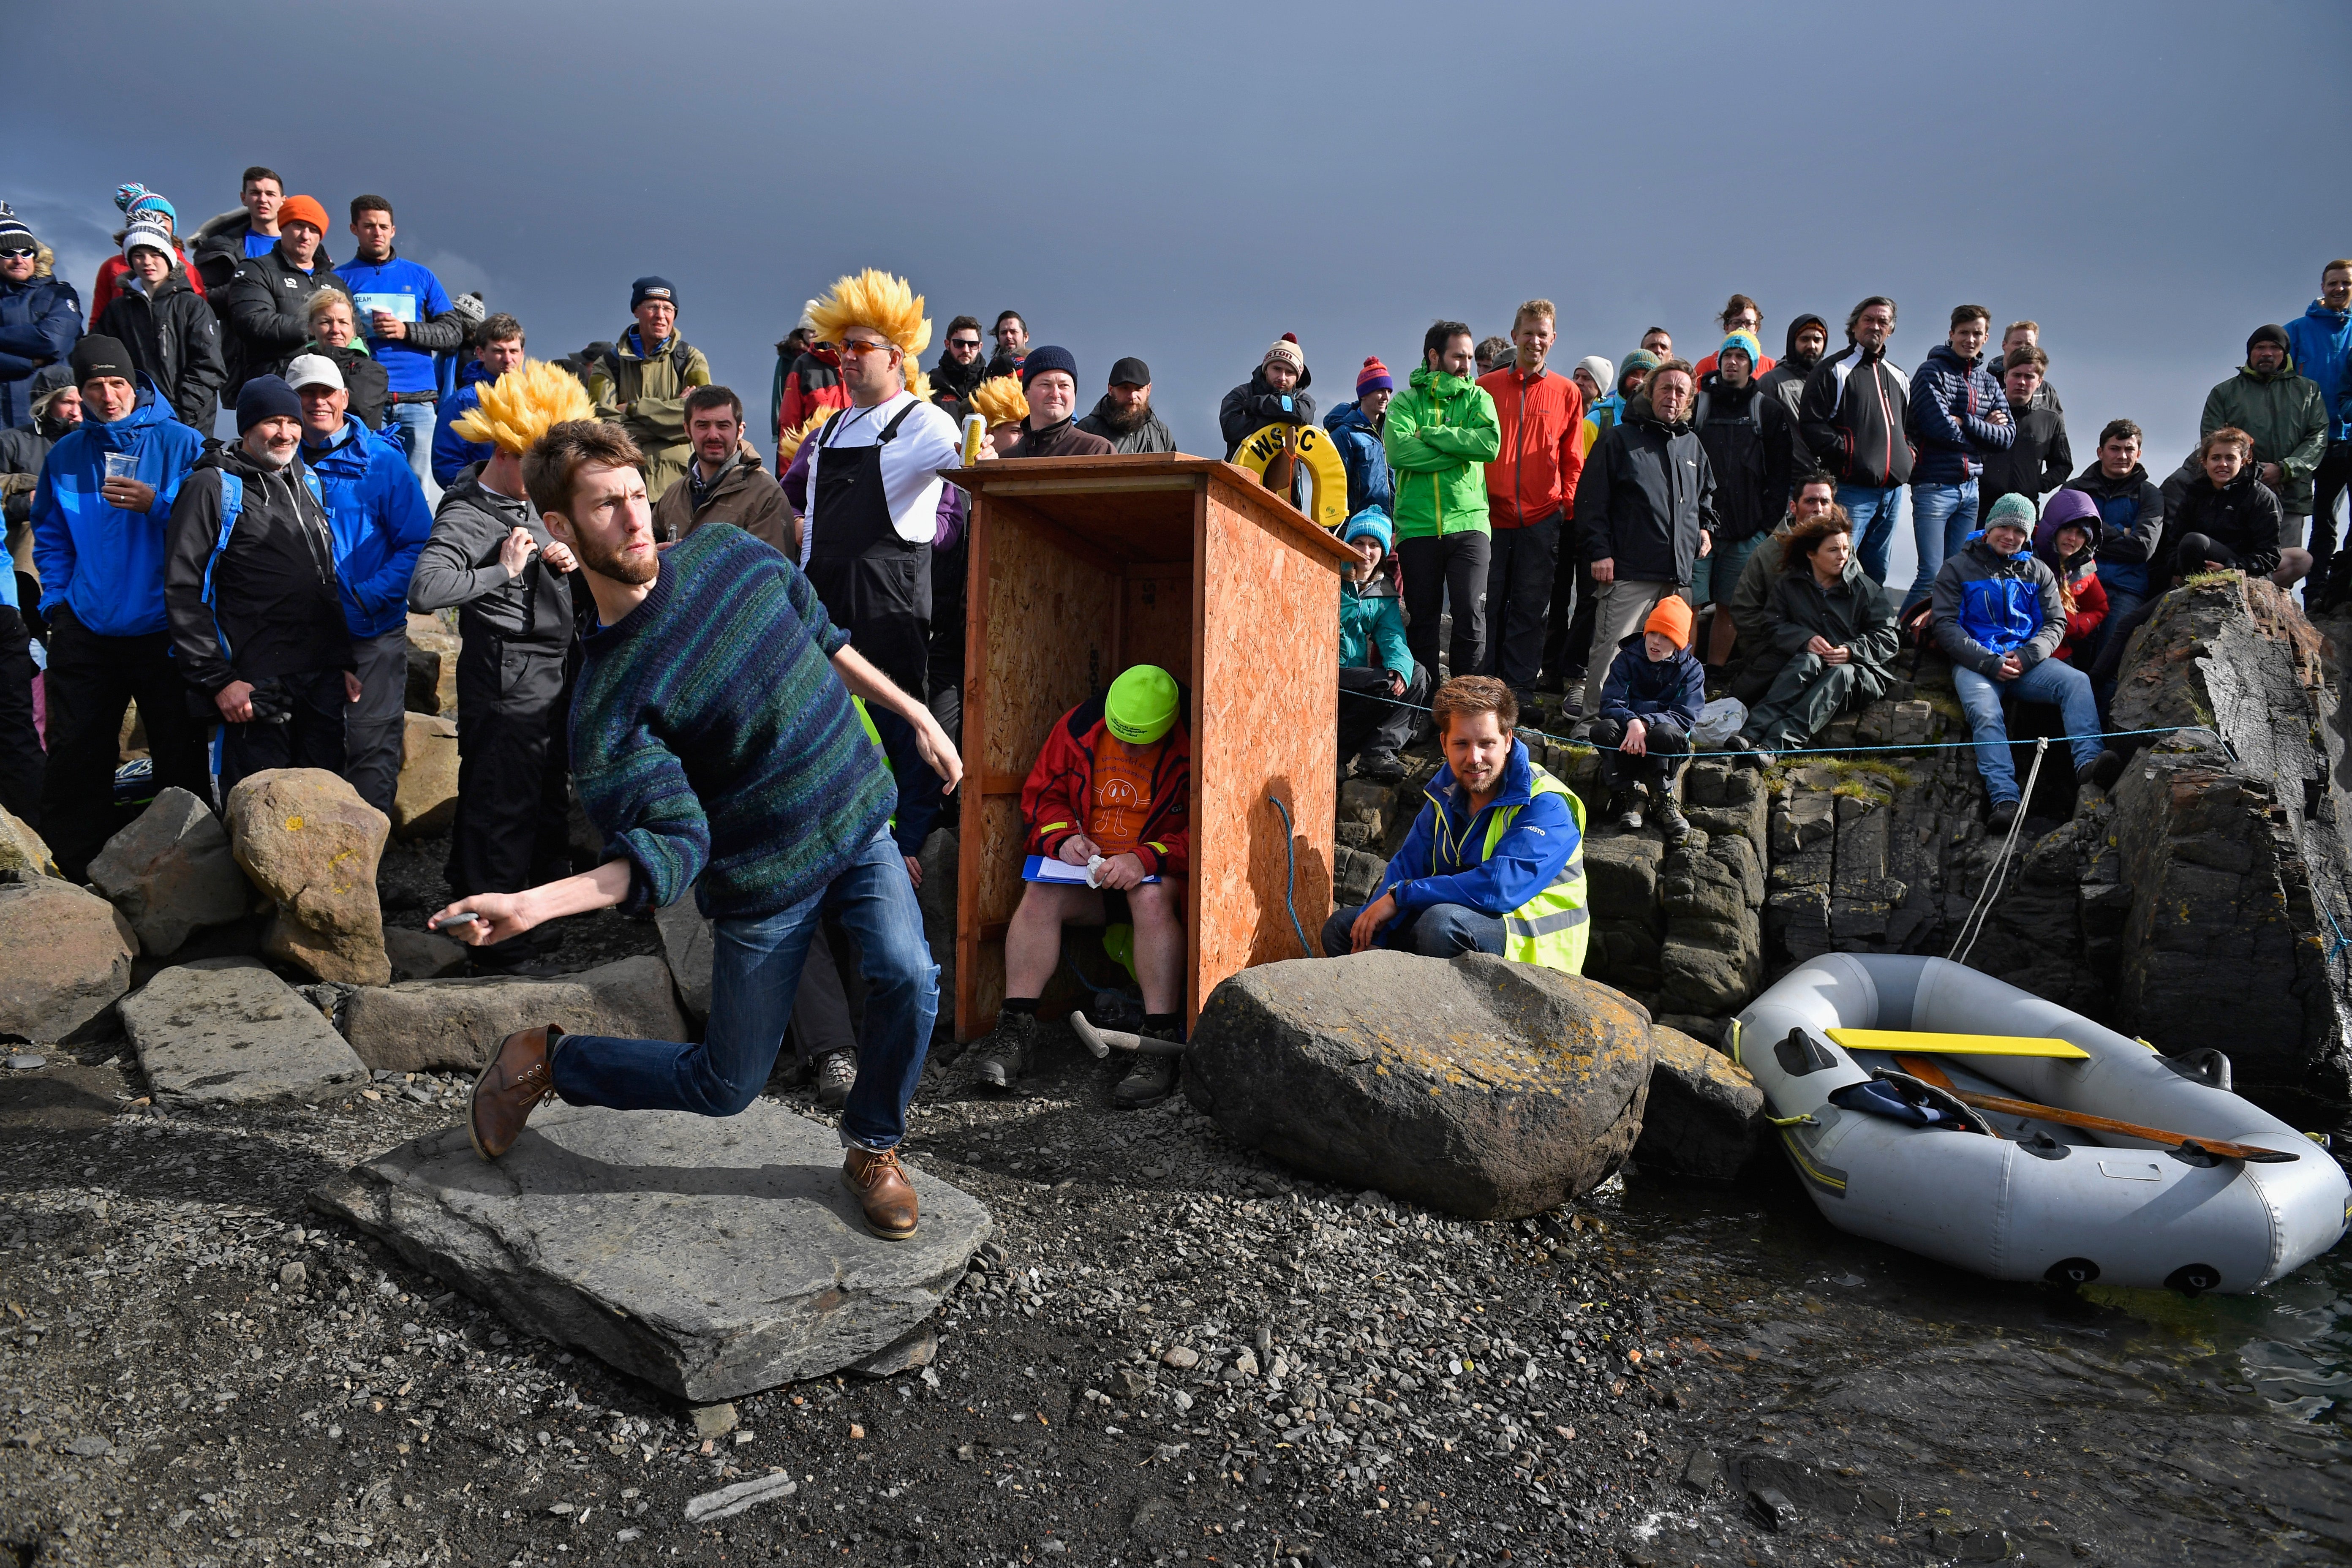 Competitors compete in the World Stone Skimming Championships, held on Easdale Island on September 25, 2016 in Easdale, Seil, Scotland